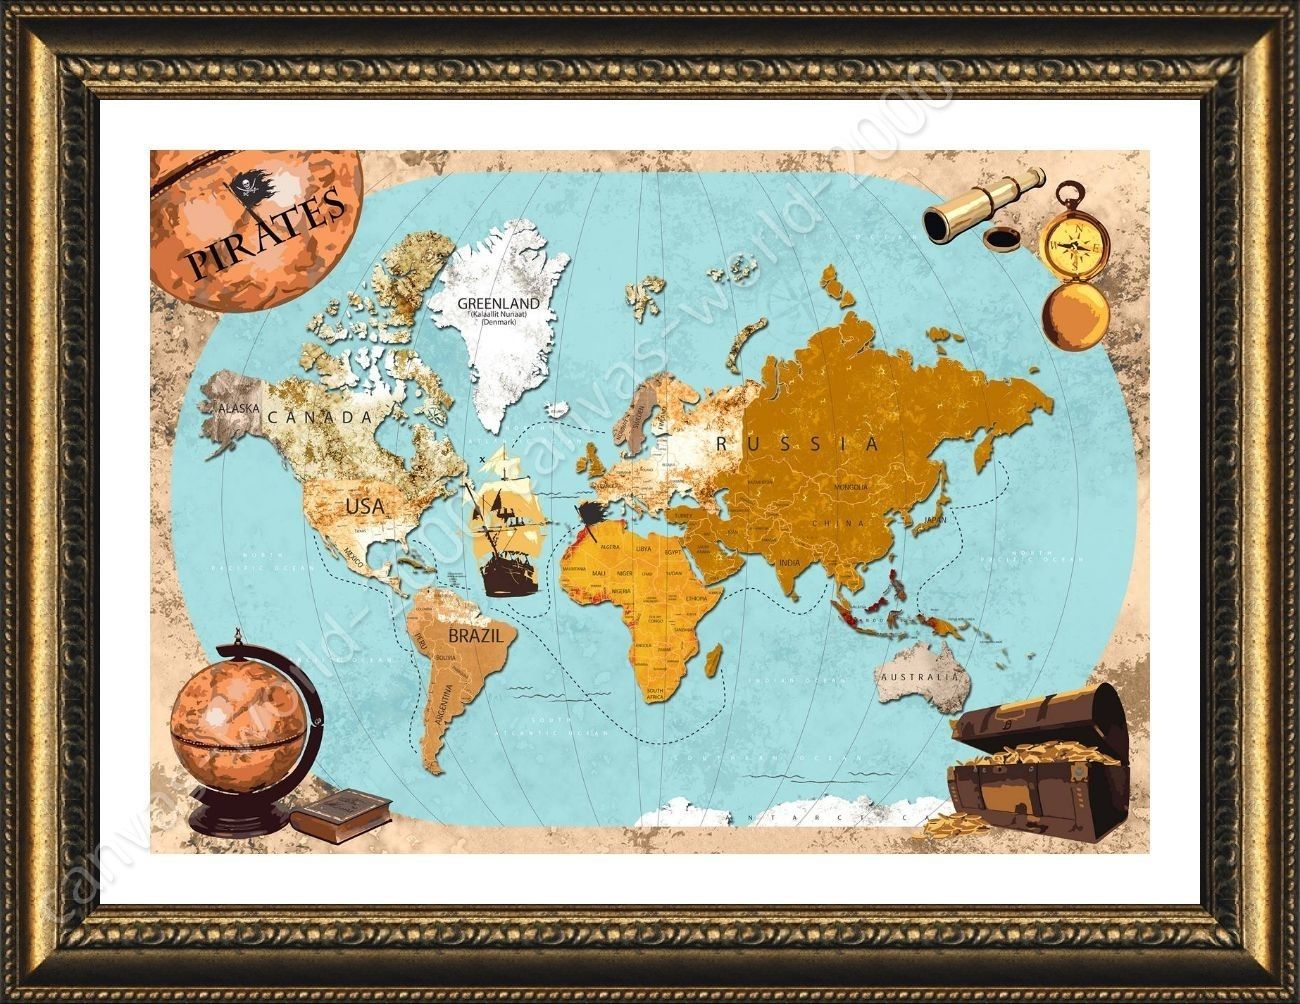 Framed Poster Pirates Old Vintage World Map Wall Art Pictures Framed Intended For World Map Wall Art Framed (View 10 of 20)